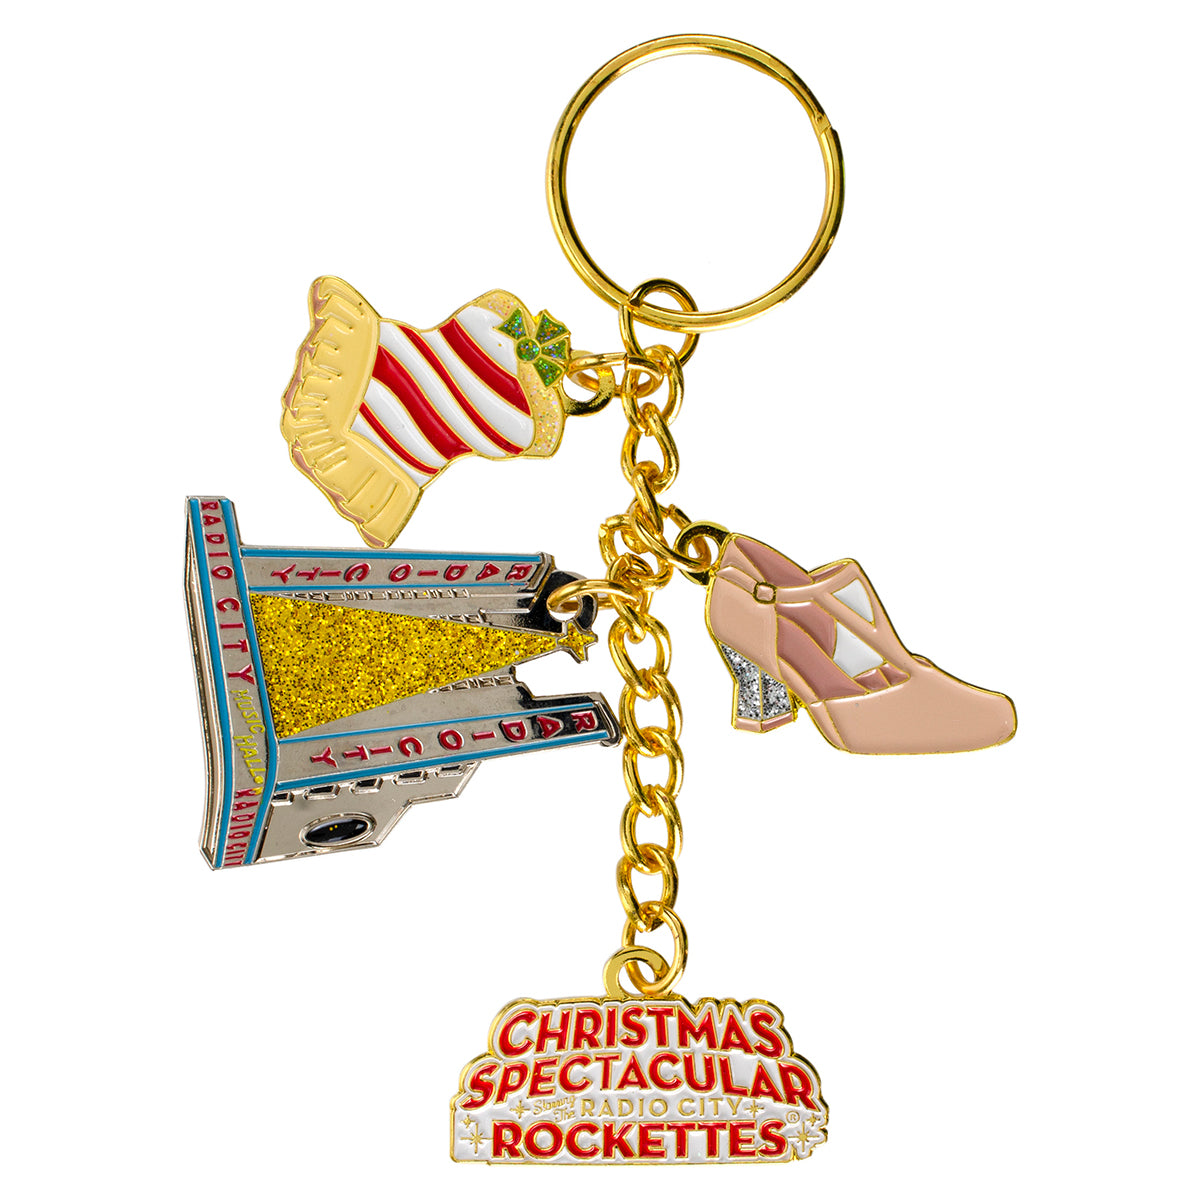 Gold Christmas-themed keychain, with Radio City Rockettes Christmas Spectacular branding